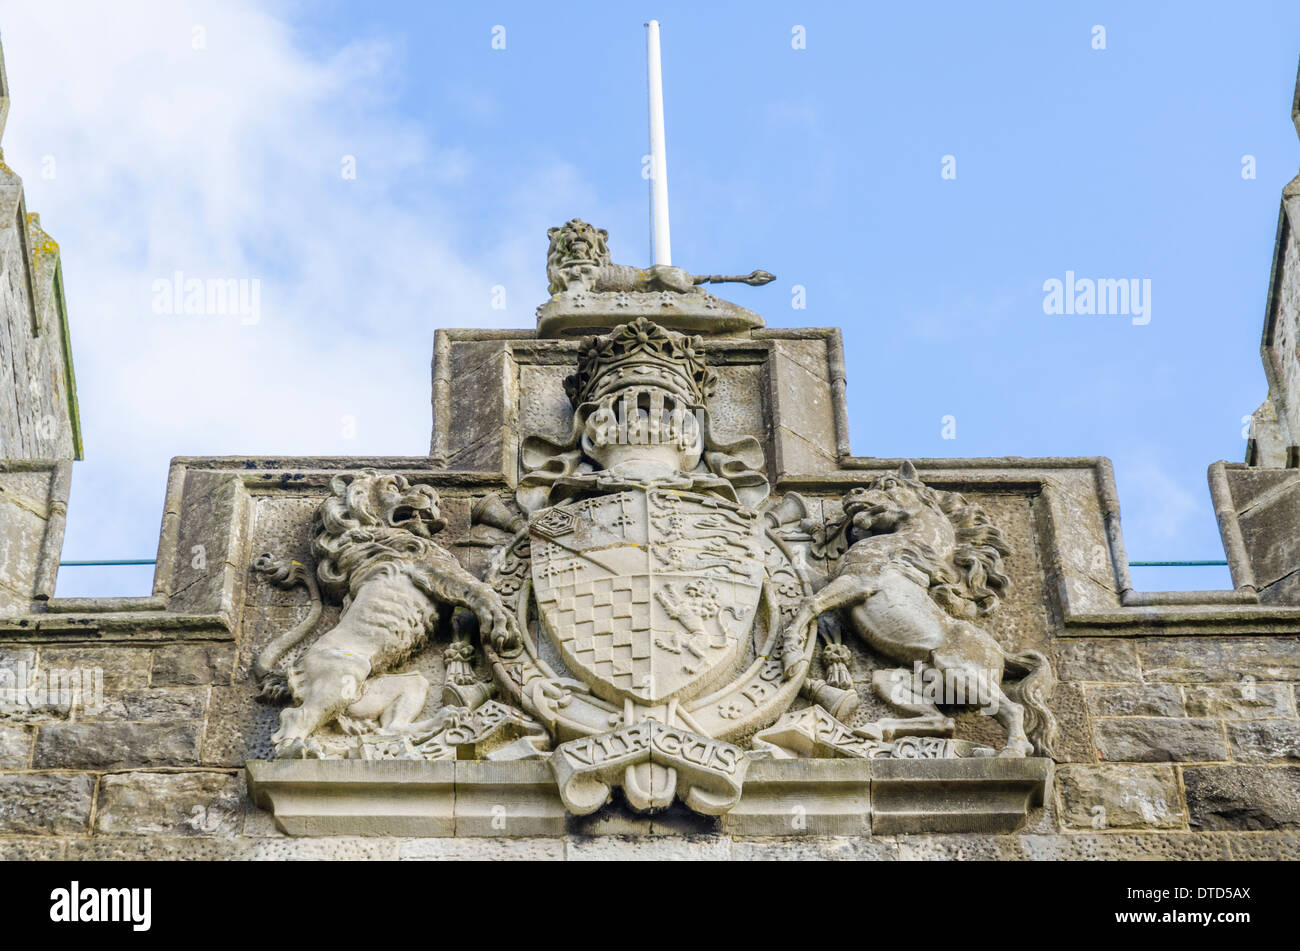 Coat of Arms for the Duke of Norfolk, Earl of Arundel, at Arundel, West Sussex, England, UK. Stock Photo